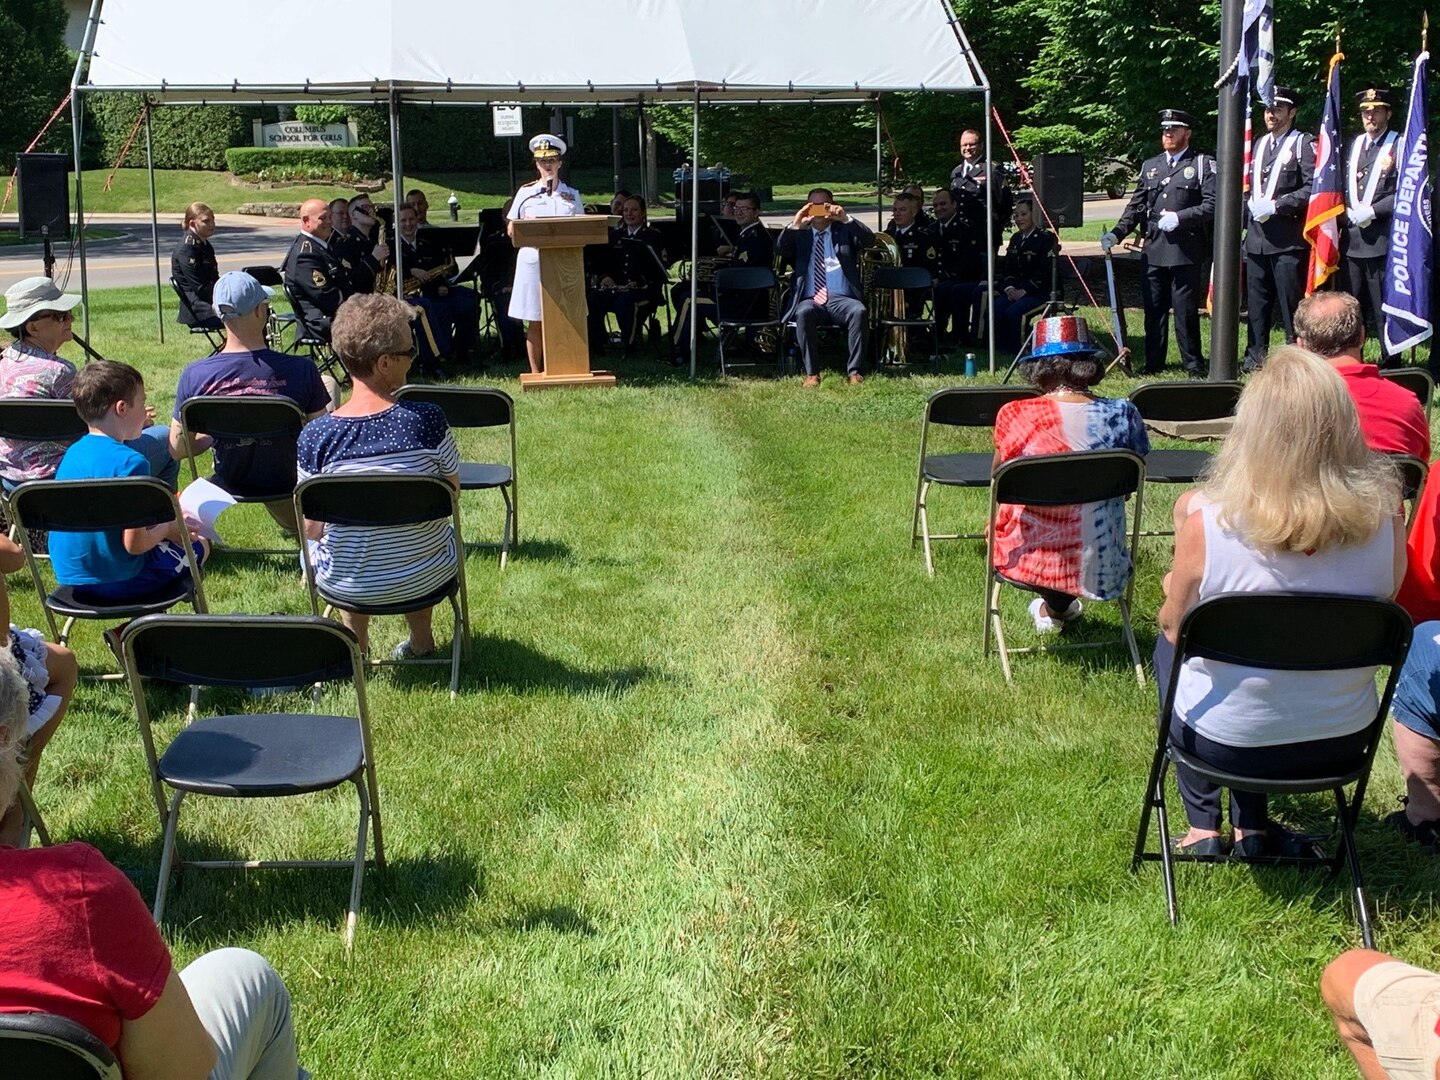 Defense Logistics Agency Land and Maritime and Defense Supply Center Columbus Commander U.S. Navy Rear Adm. Kristen Fabry spoke to a crowd of more than 100 attendees in Bexley, Ohio at the community’s World War II memorial, May 31.